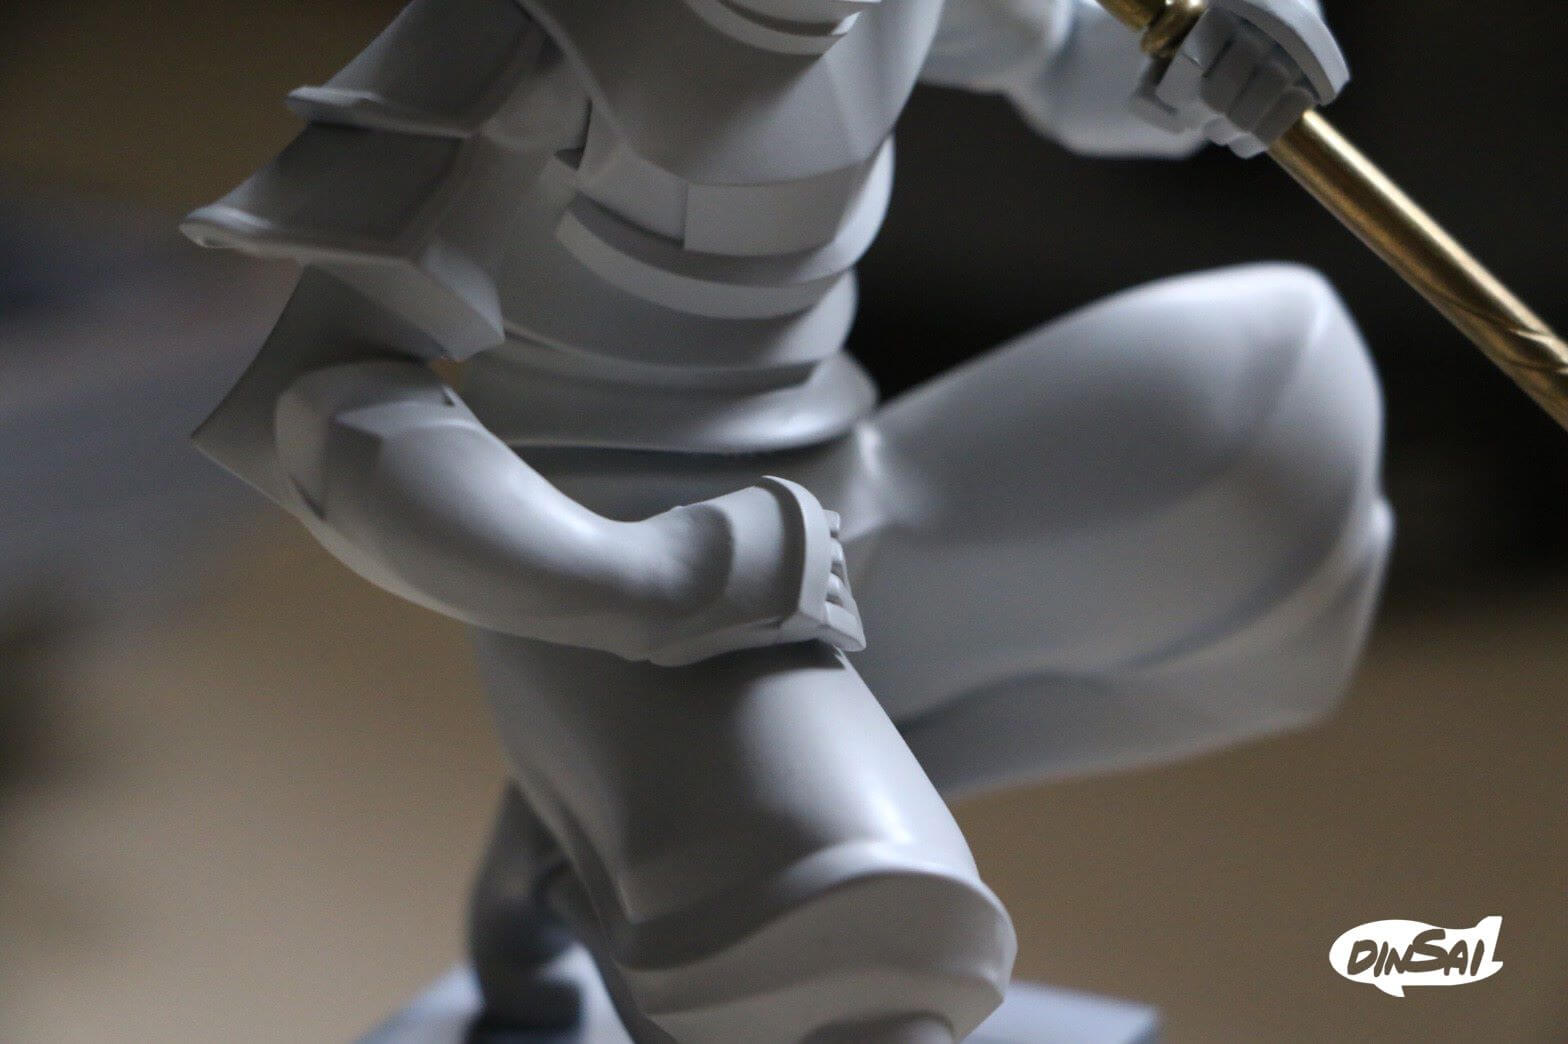 WUKONG resin model by Dinsai FULL arm